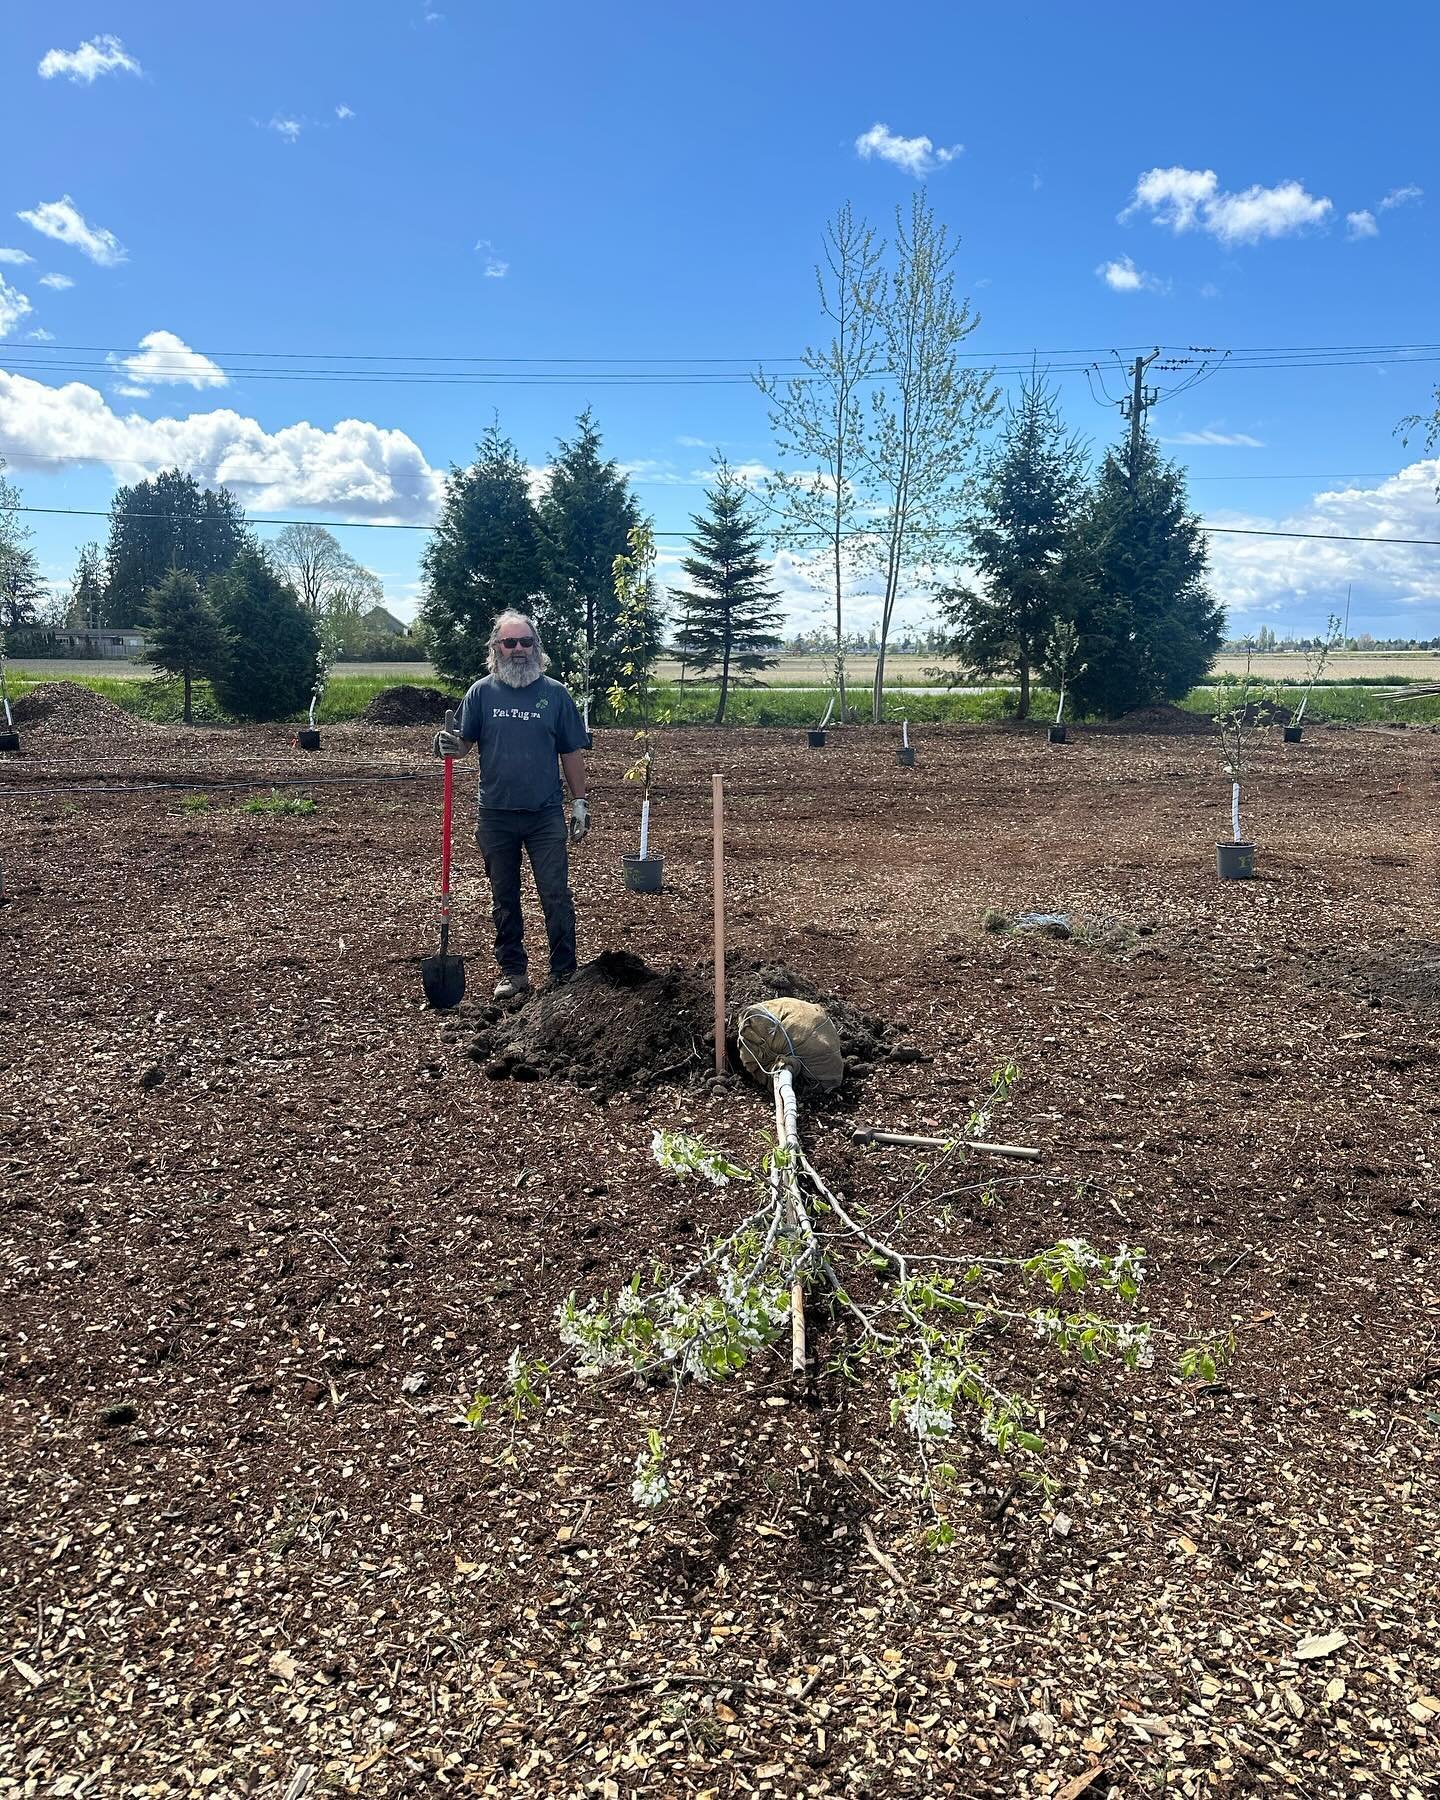 Our old parking lot, right next to the Schoolhouse, has been transformed into the most beautiful little orchard. Thank you Ryan for all of your hard work and doing such an amazing job planting each tree! There are some gaps to fill in very soon with 